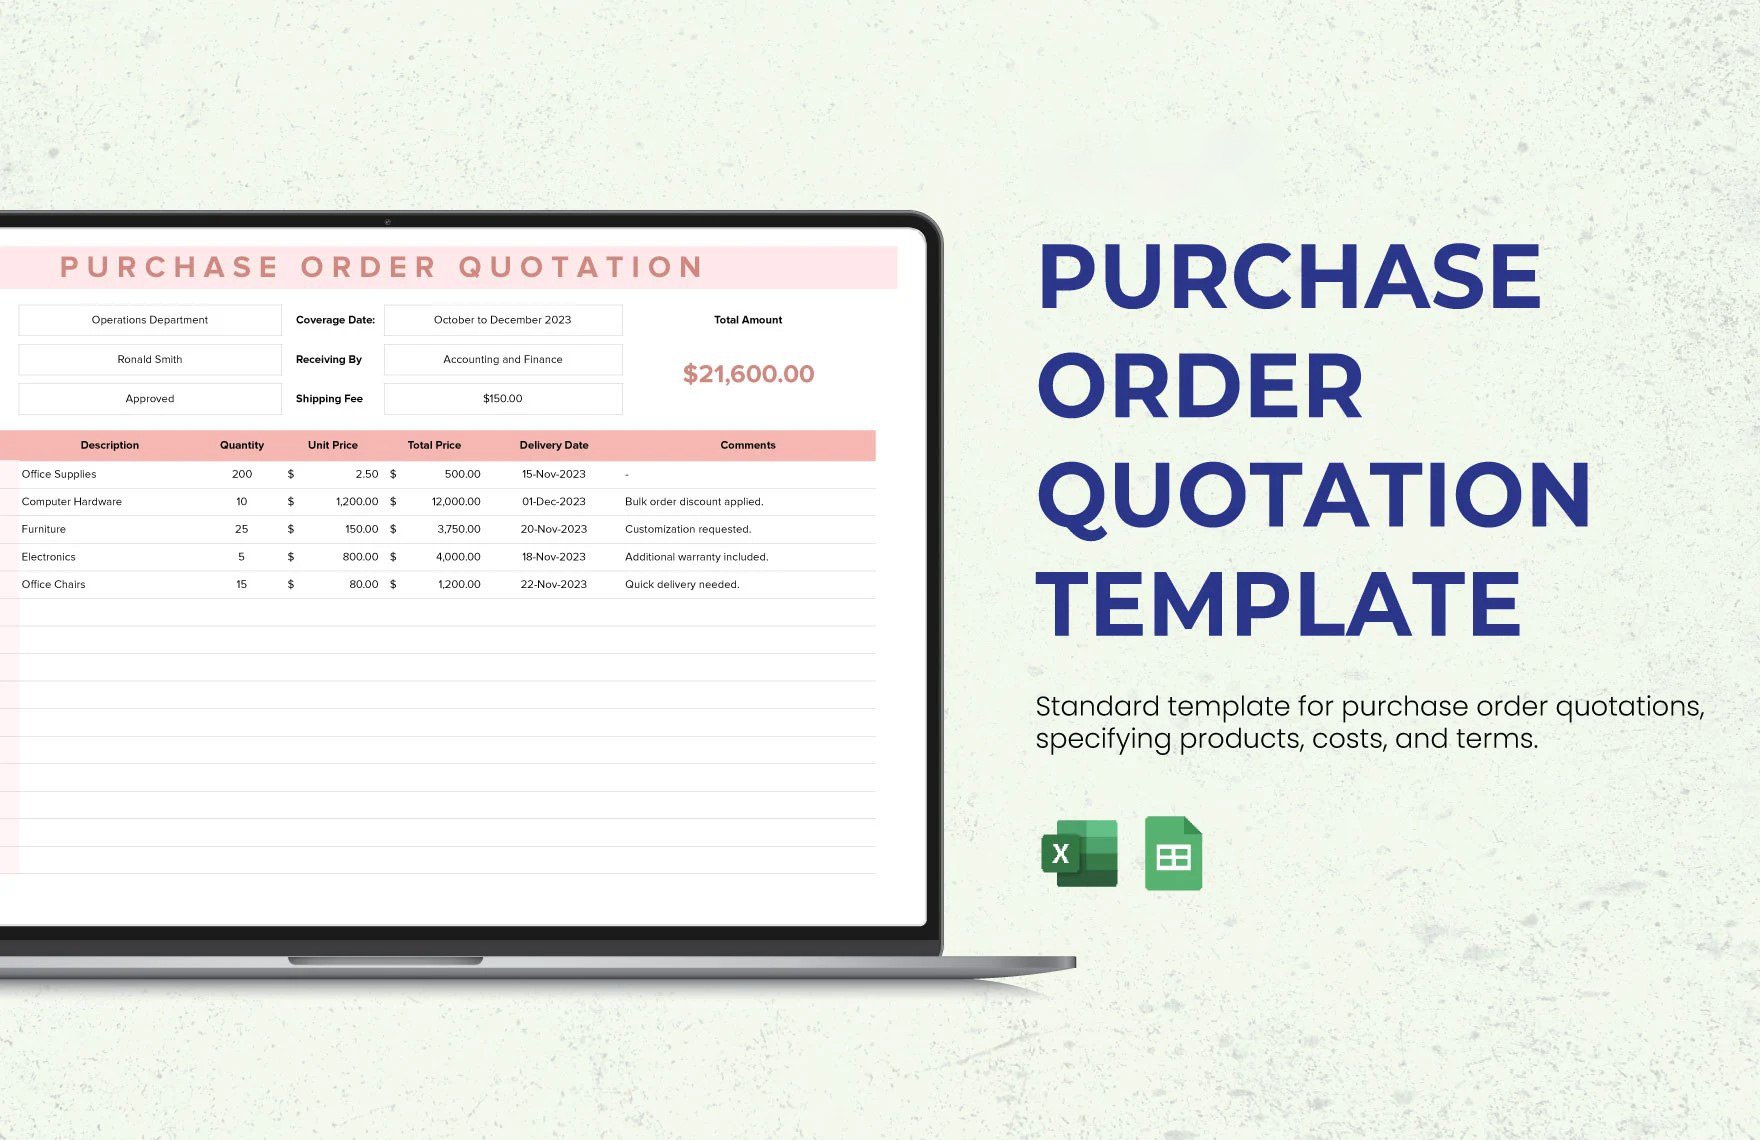 Free Purchase Order Quotation Template in Excel, Google Sheets